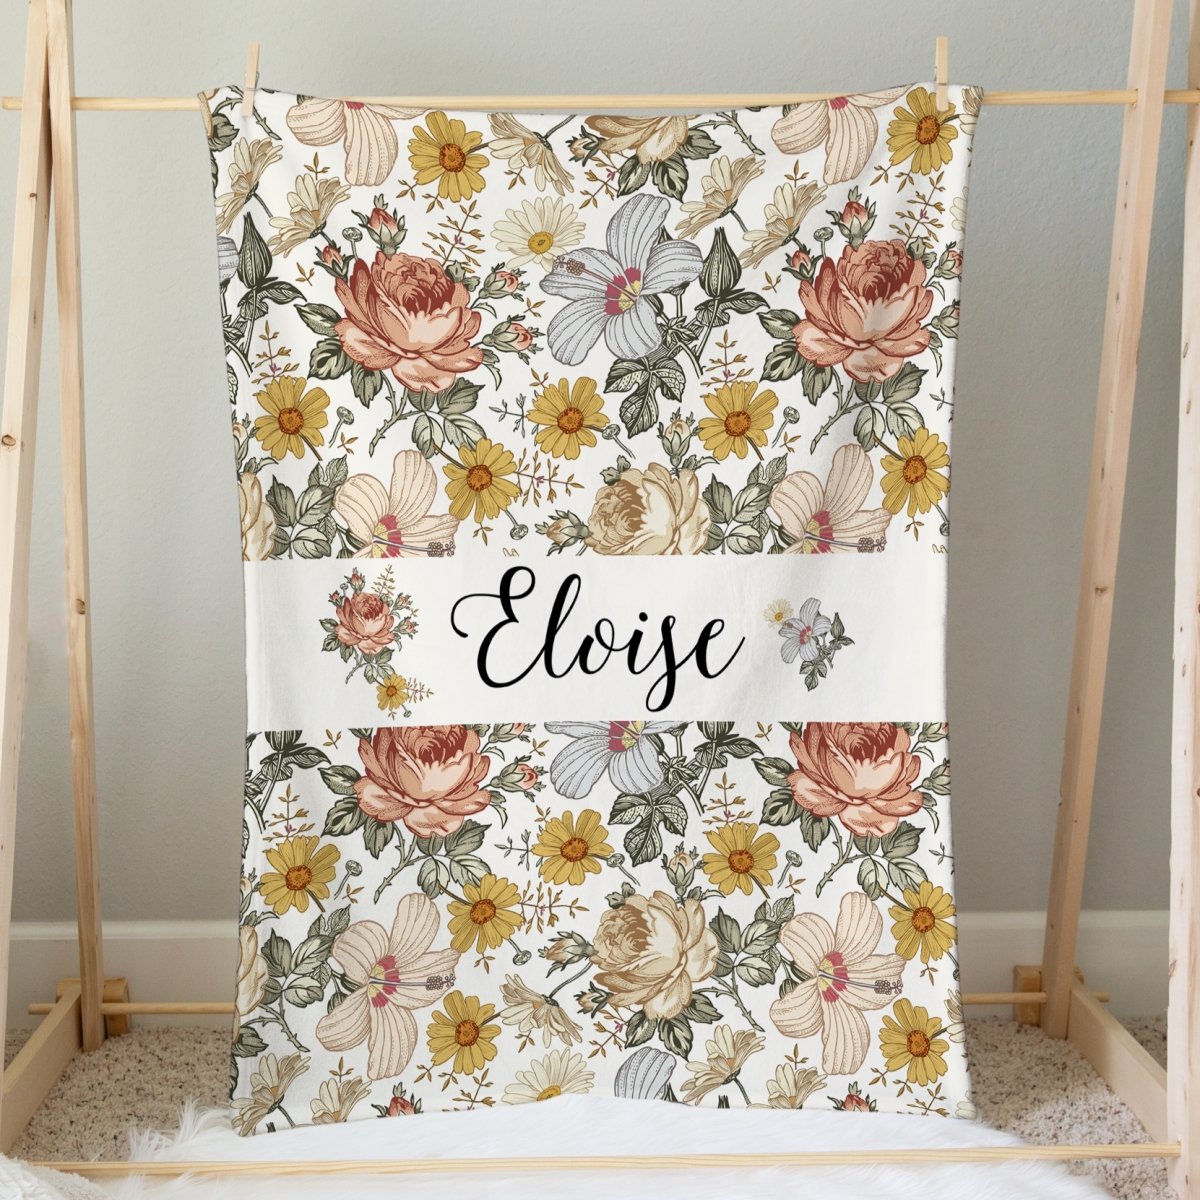 Vintage Earthy Floral Personalized Minky Blanket - gender_girl, Personalized_Yes, Pink and Navy Petals